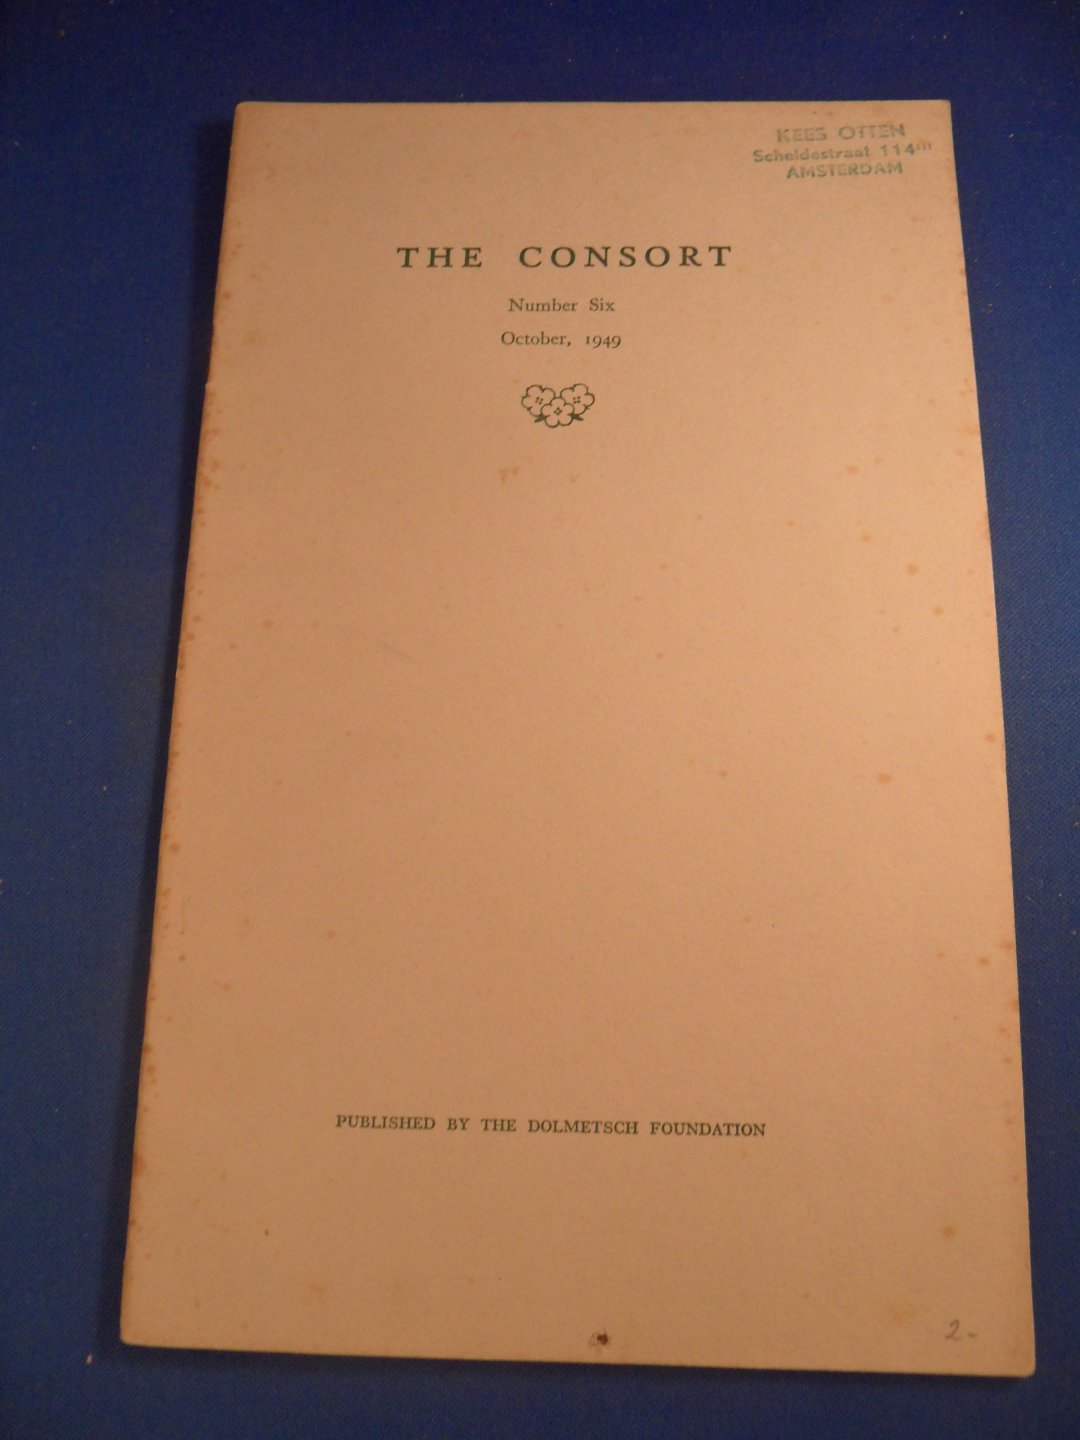 Dolmetsch foundation - The consort, no. 6 1949. Journal of the Dolmetsch foundation